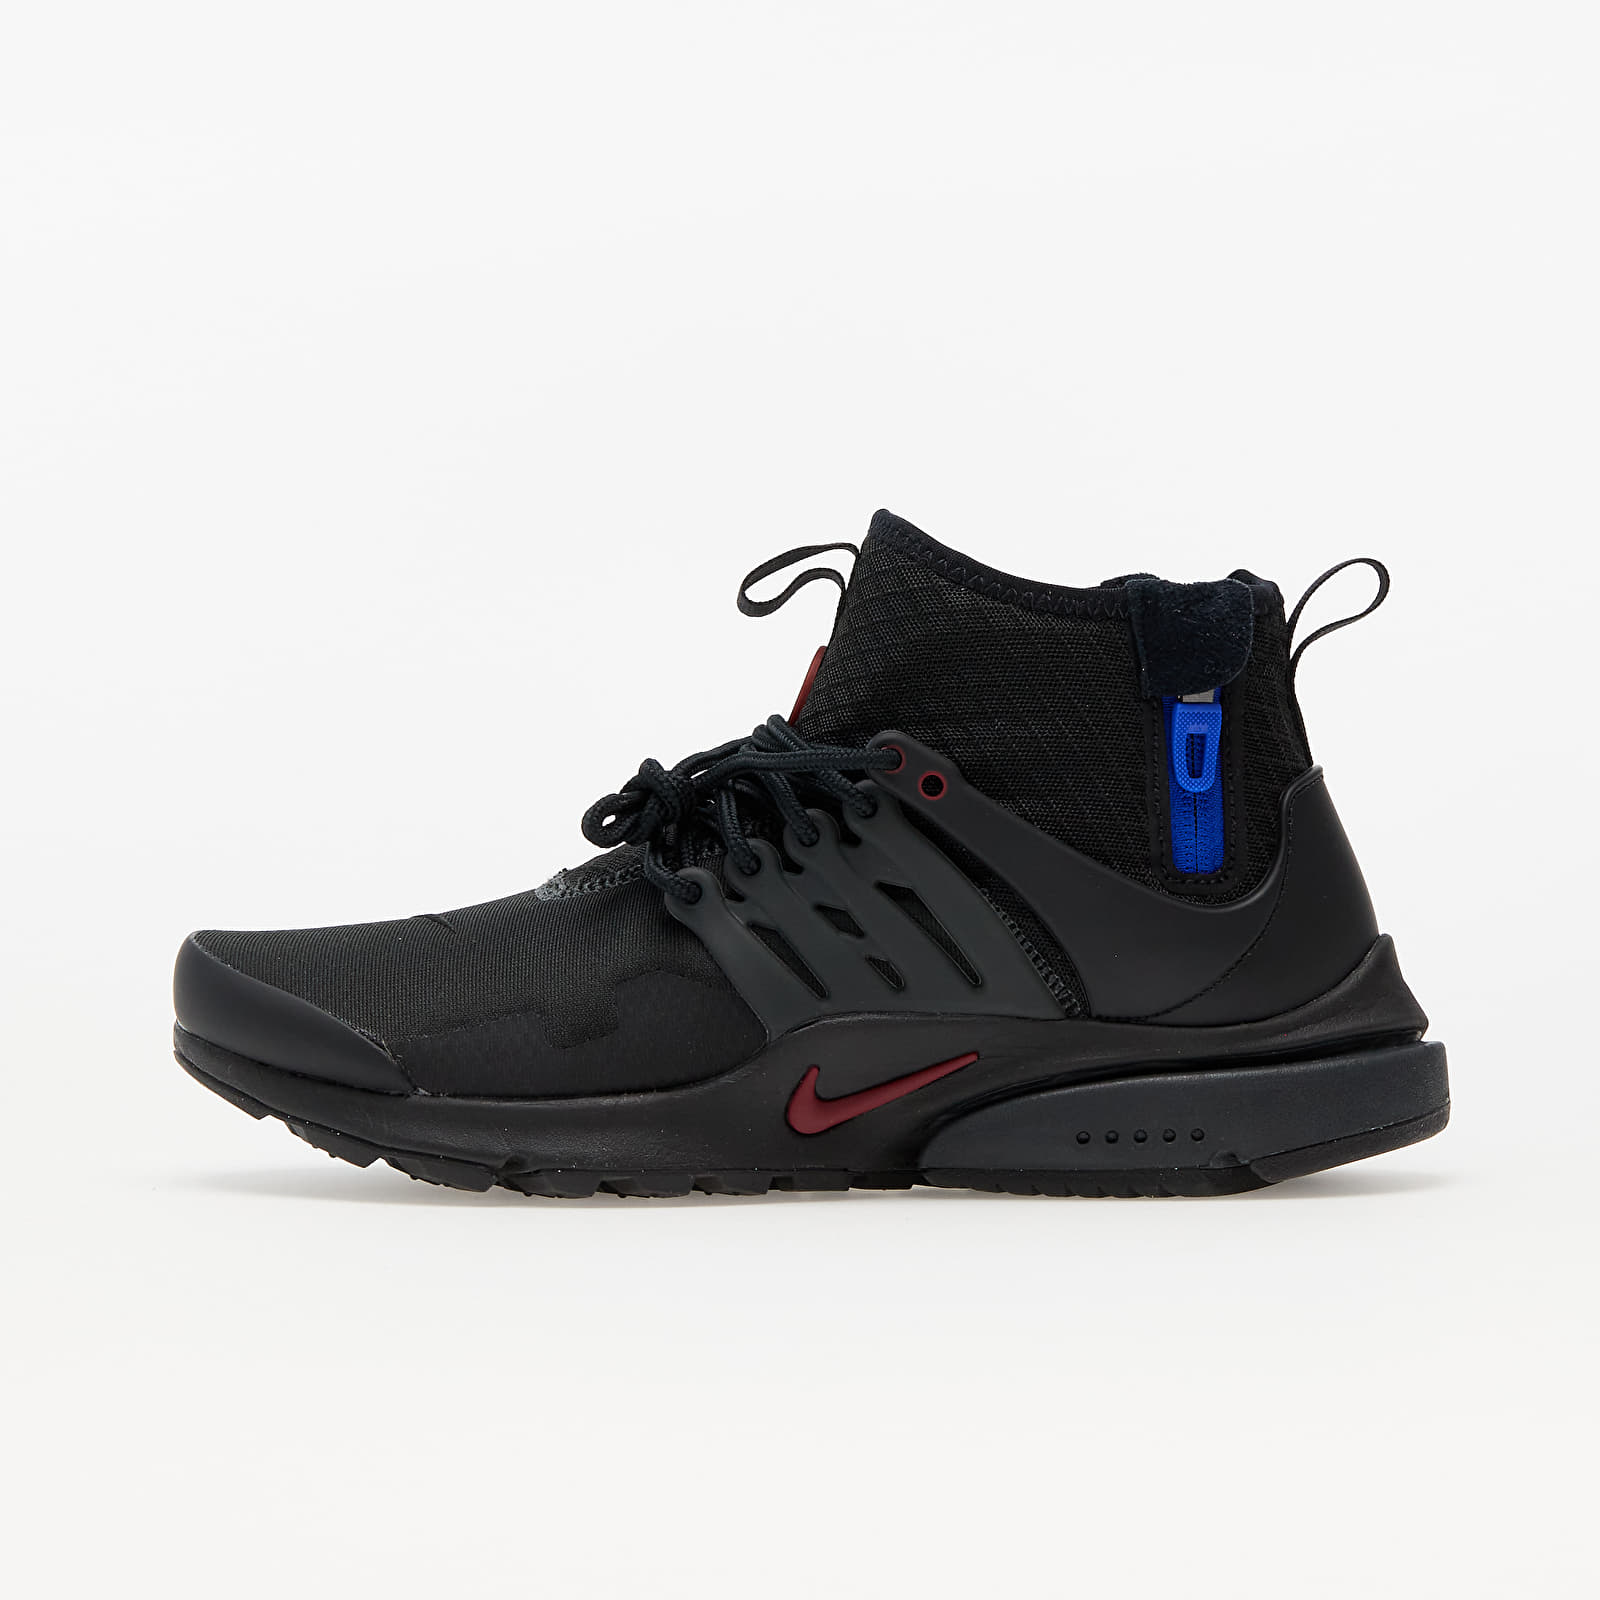 Chaussures et baskets homme Nike Air Presto Mid Utility Black/ Team Red-Anthracite-Racer Blue